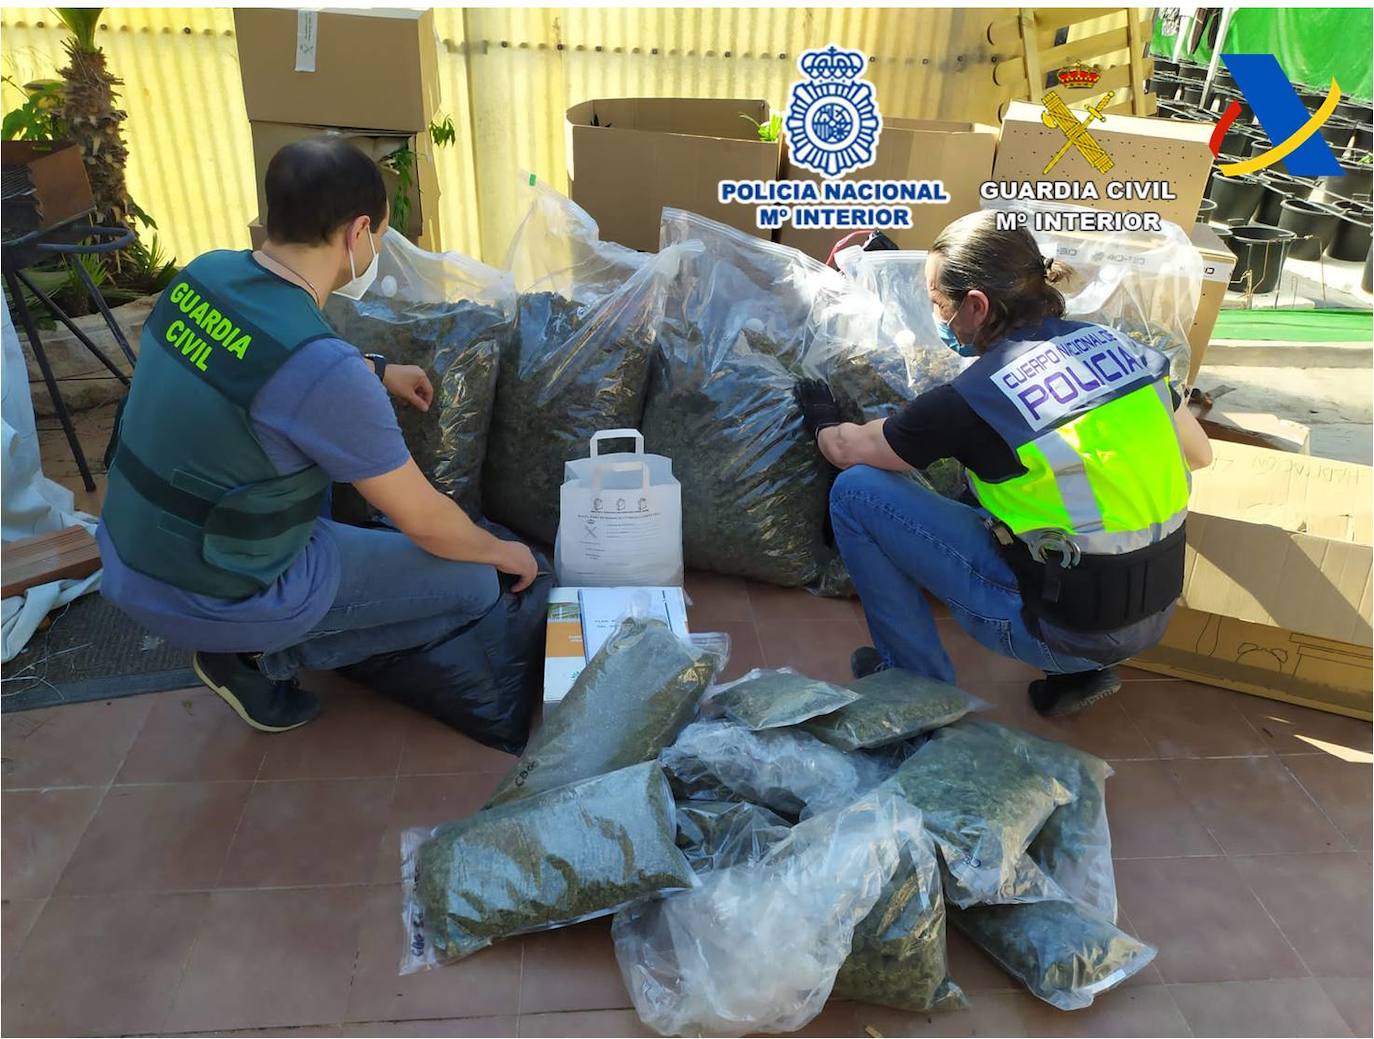 Mail Order Drugs As Costa Blanca Gang Send Out Marijuana Parcels From Alicante Elche Airport In Spain